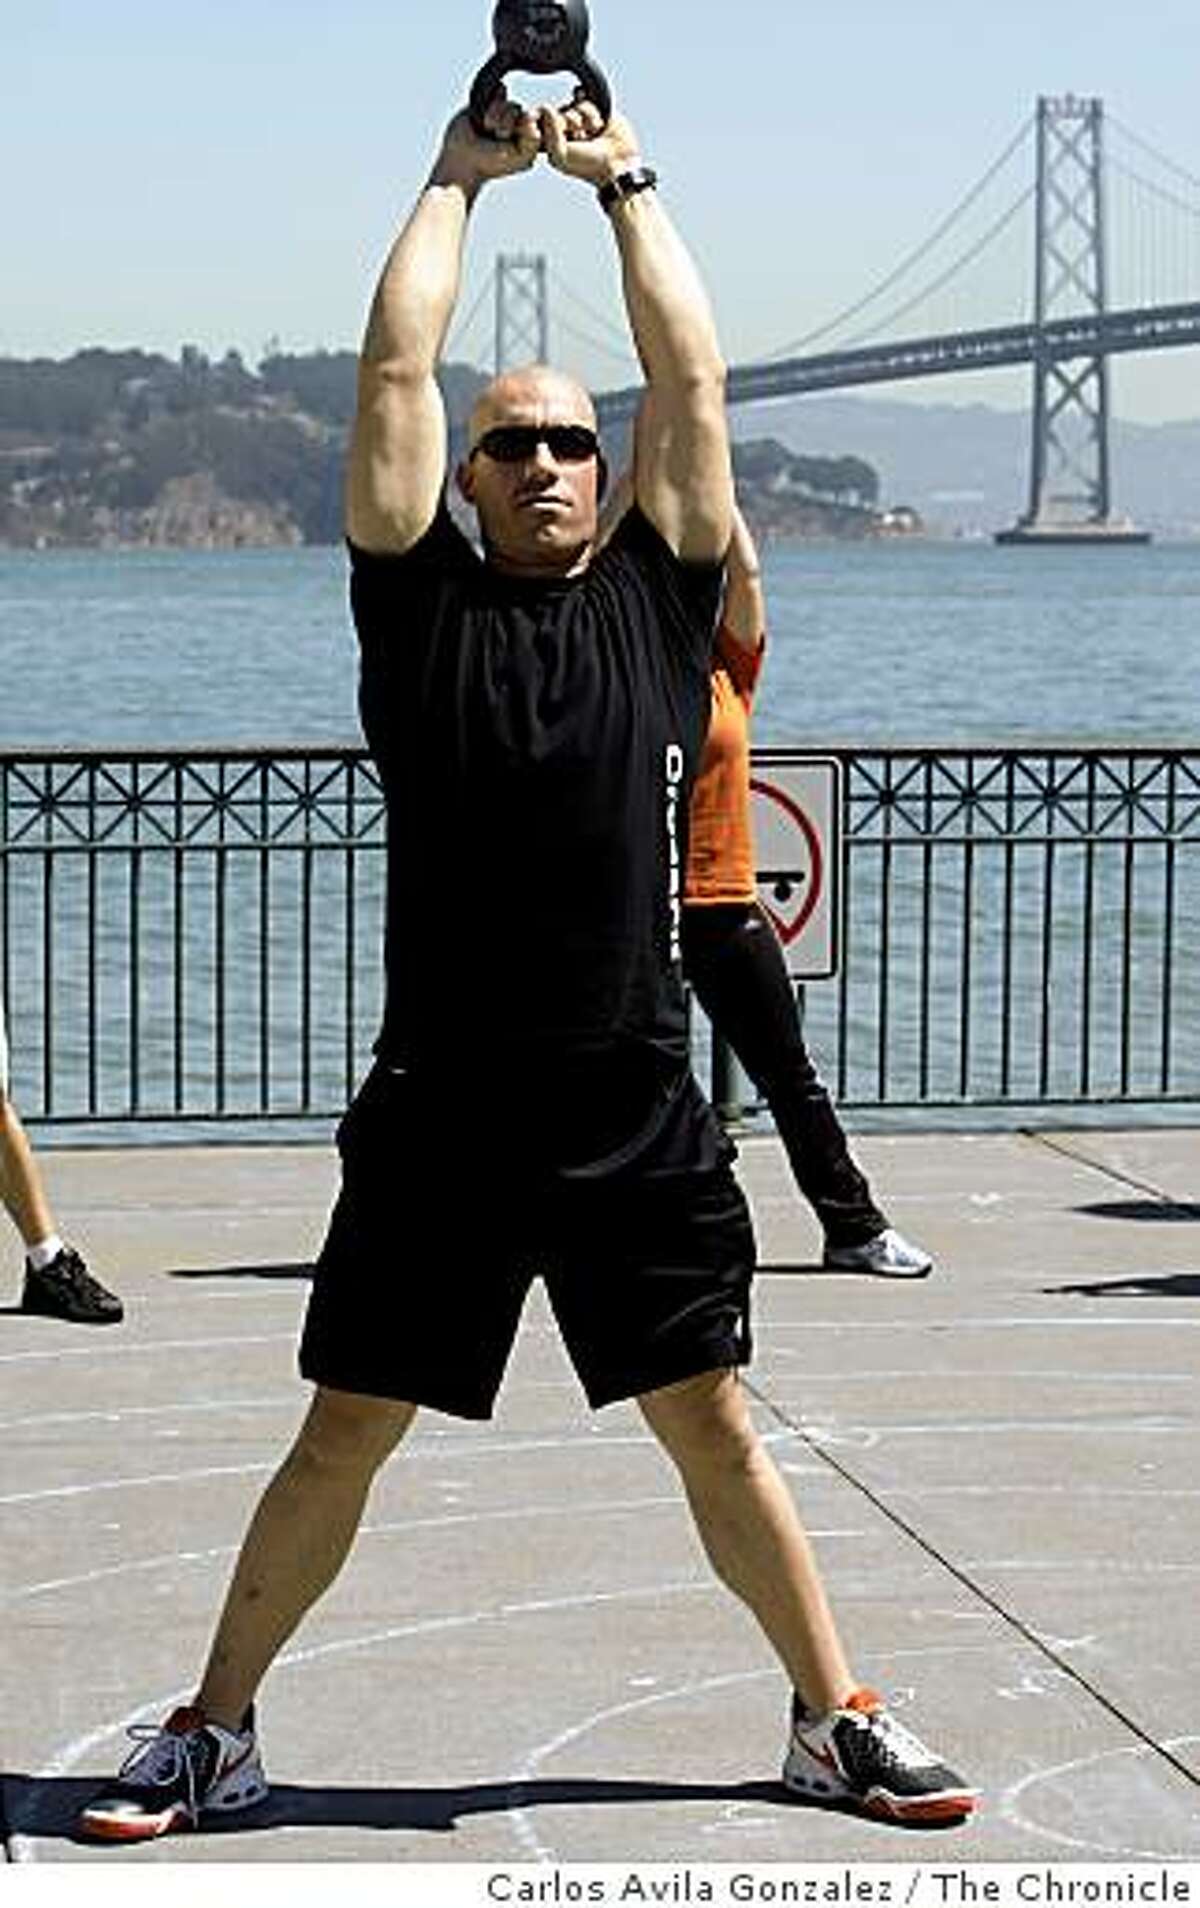 Chris LaLanne, grandnephew of Jack LaLanne, the 93-year-old fitness guru who was born in San Francisco, is giving his famous relative a run for his fitness money. LaLanne, with ripped body and shaved head, has just opened his own gym in San Francisco's South of Market. LaLanne the younger trained for years with LaLanne the elder, but has tweaked his mentor's approach to make it his own.